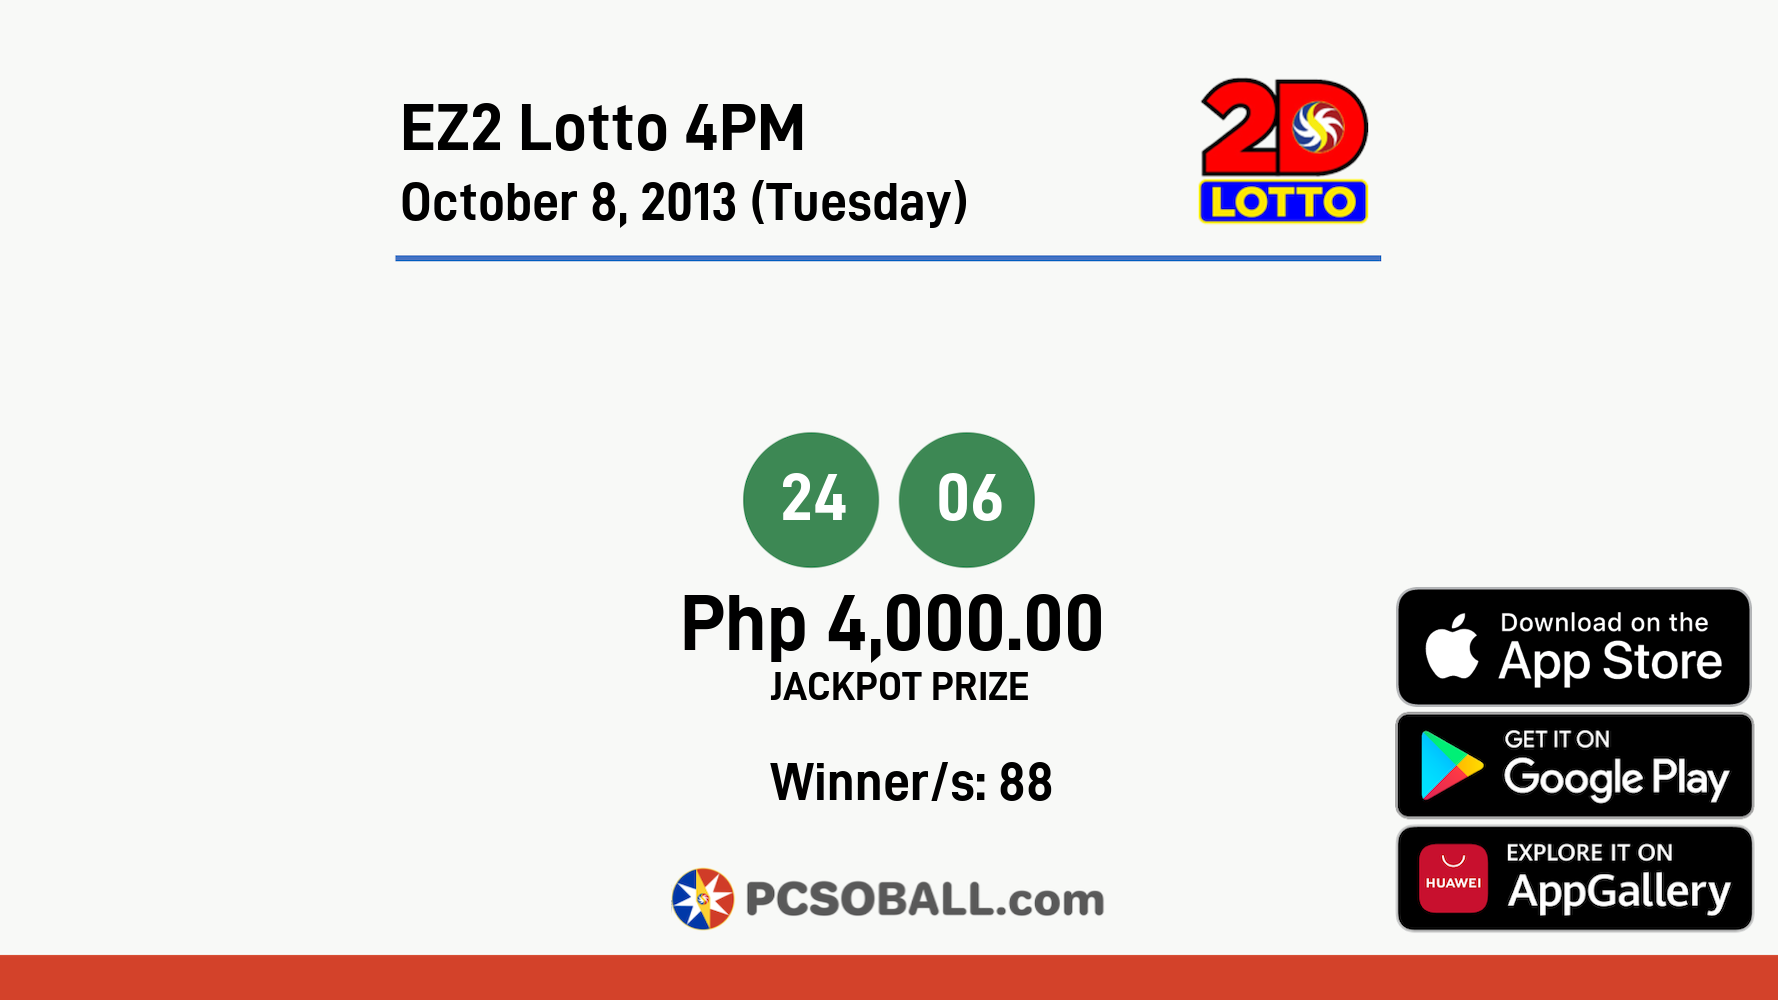 EZ2 Lotto 4PM October 8, 2013 (Tuesday) Result